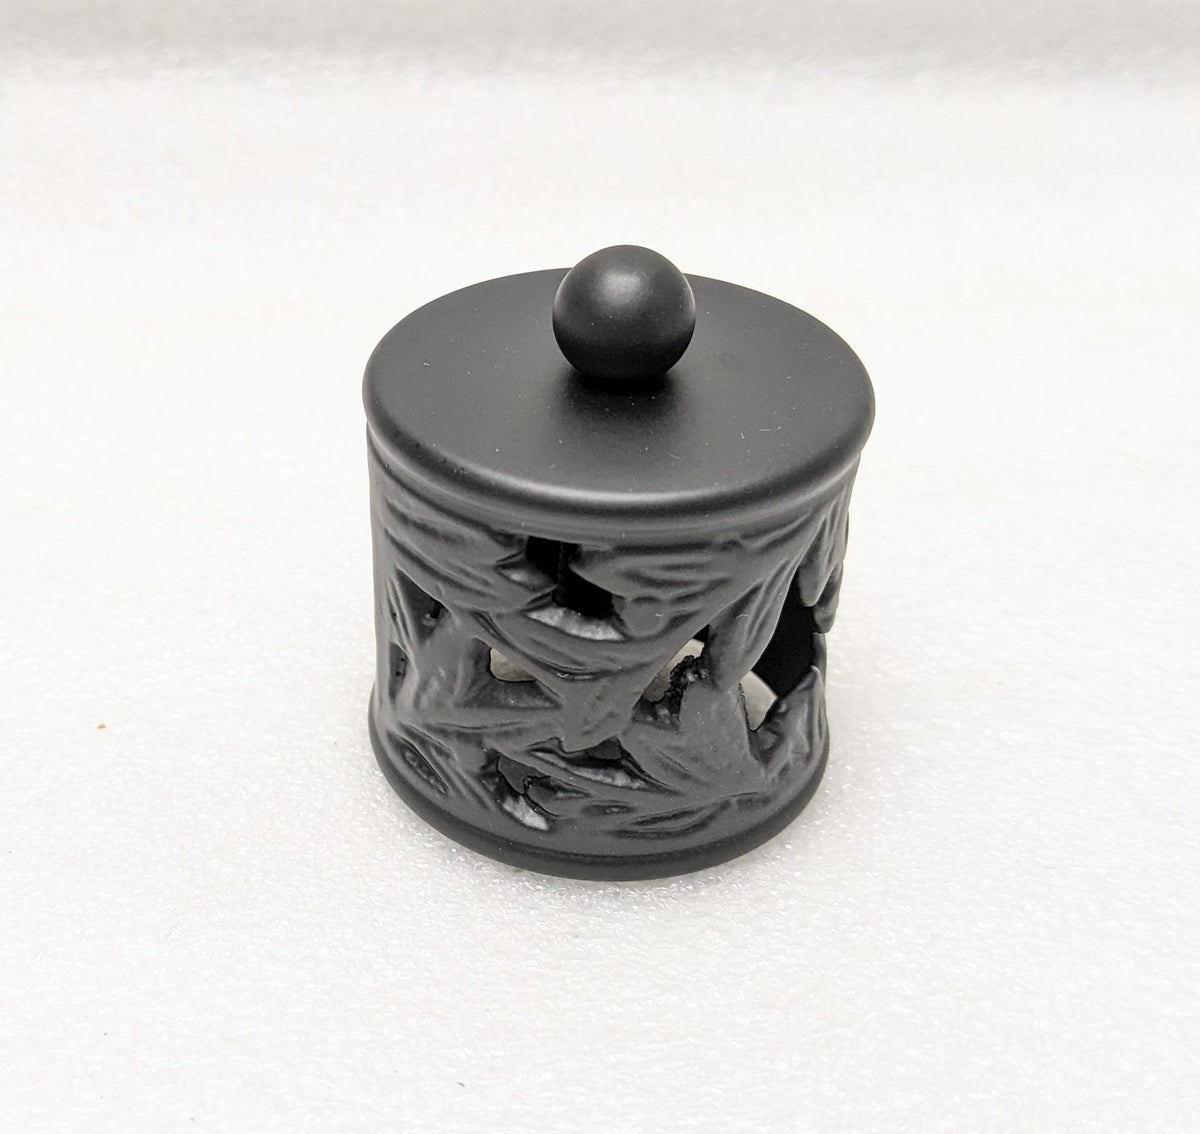 Filigree End Cap for 1" Tubing END CAPS AND FINIALS,COMPONENTS FOR 1" OD TUBING Matte-Black-Powder-Coated-Finish Trade Diversified